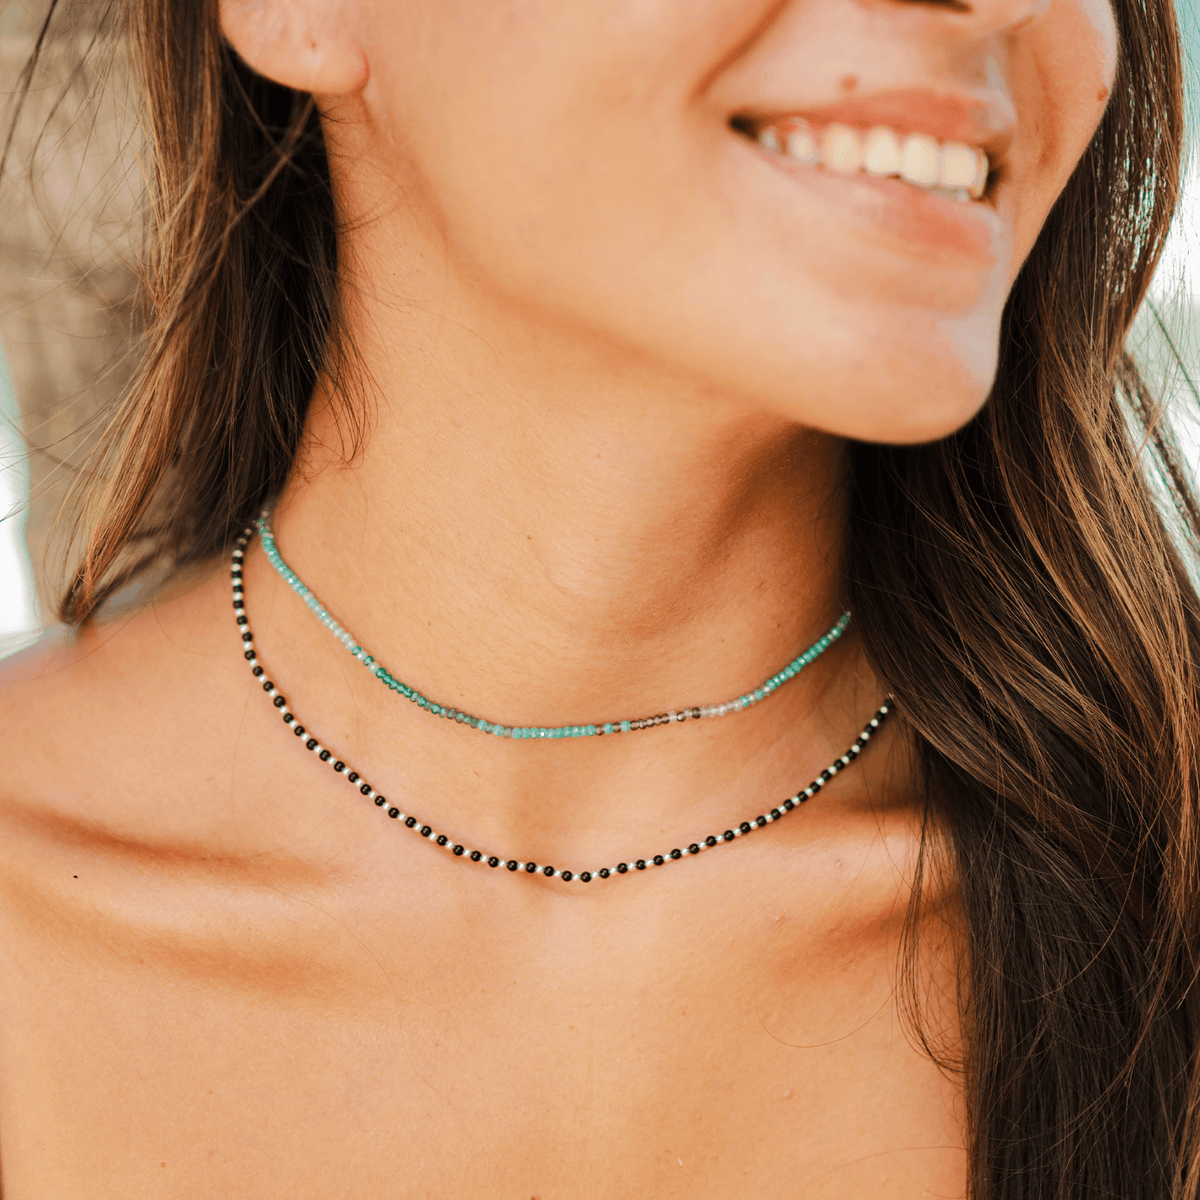 Model wearing a stack of two necklaces. One is a teal and blue stone goddess necklace and the other is a onyx healing stone necklace